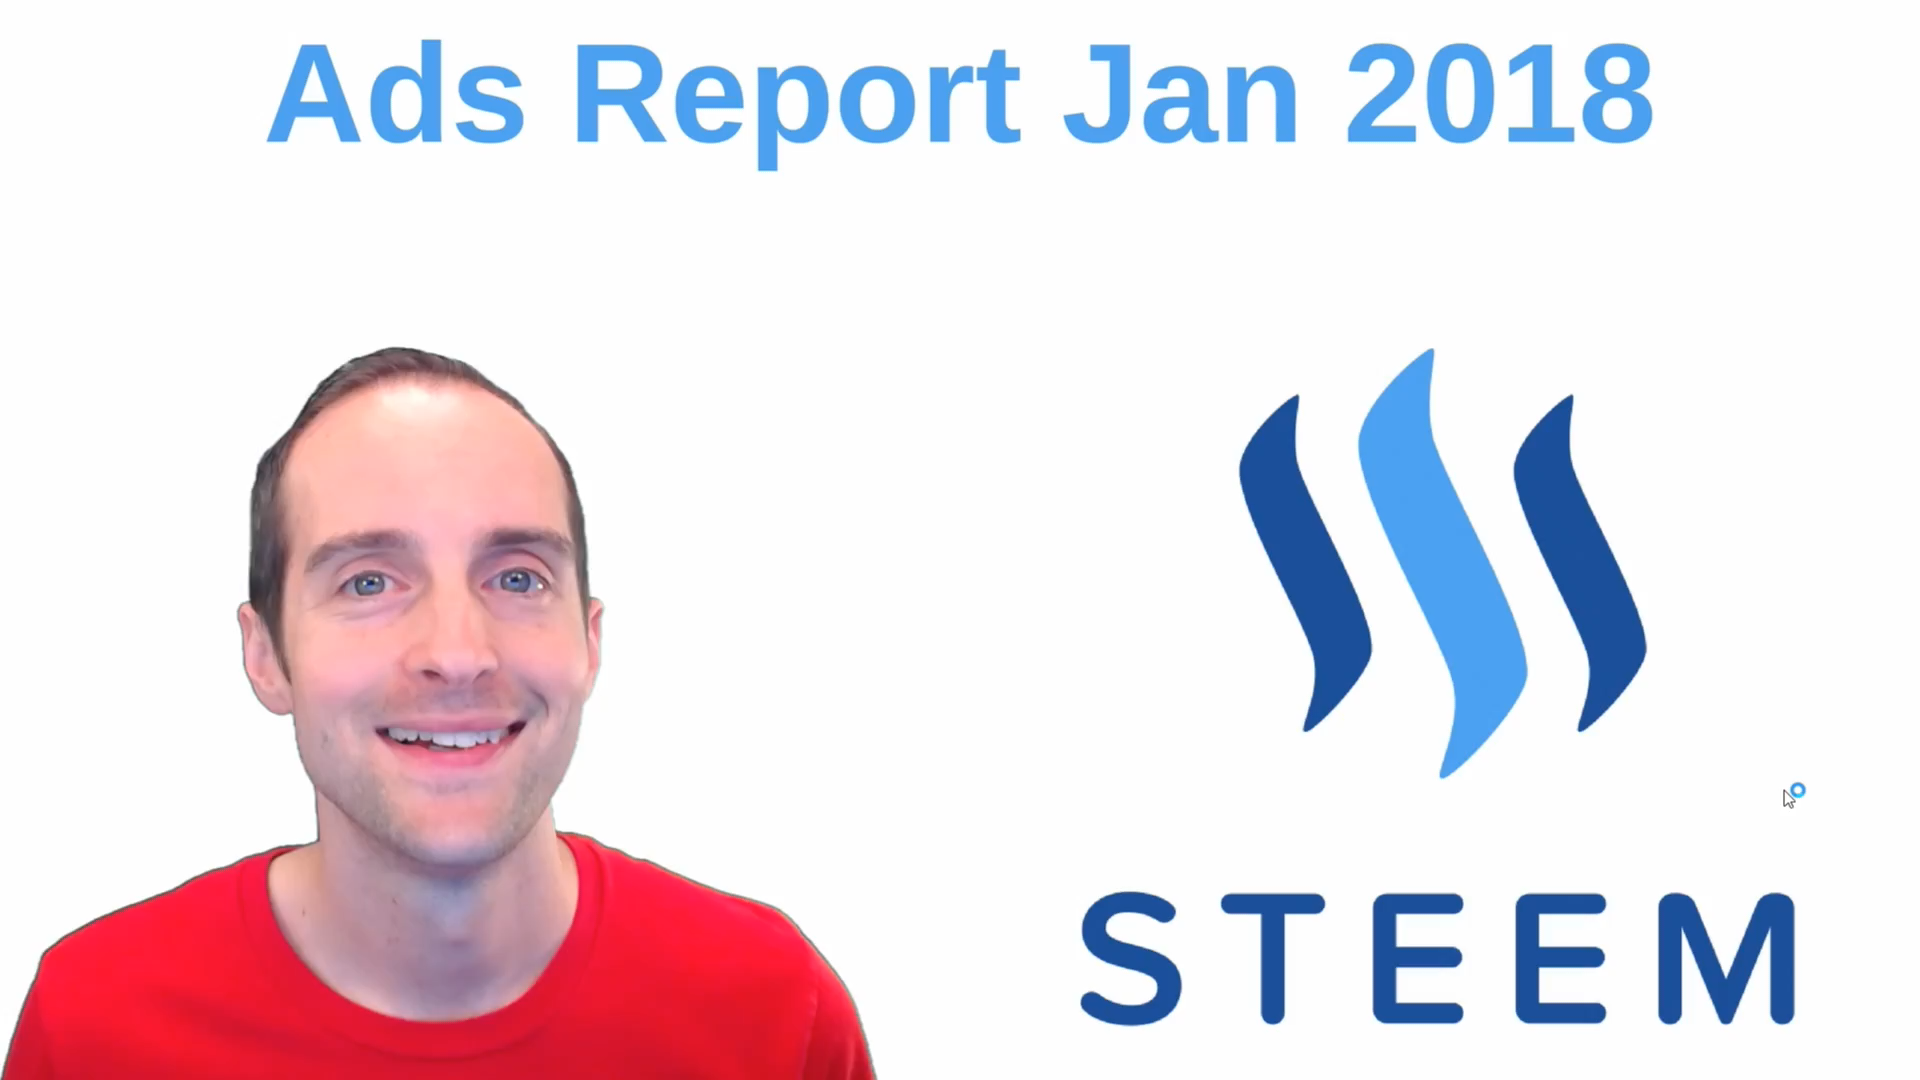 Steem Ads Report January 2018.png